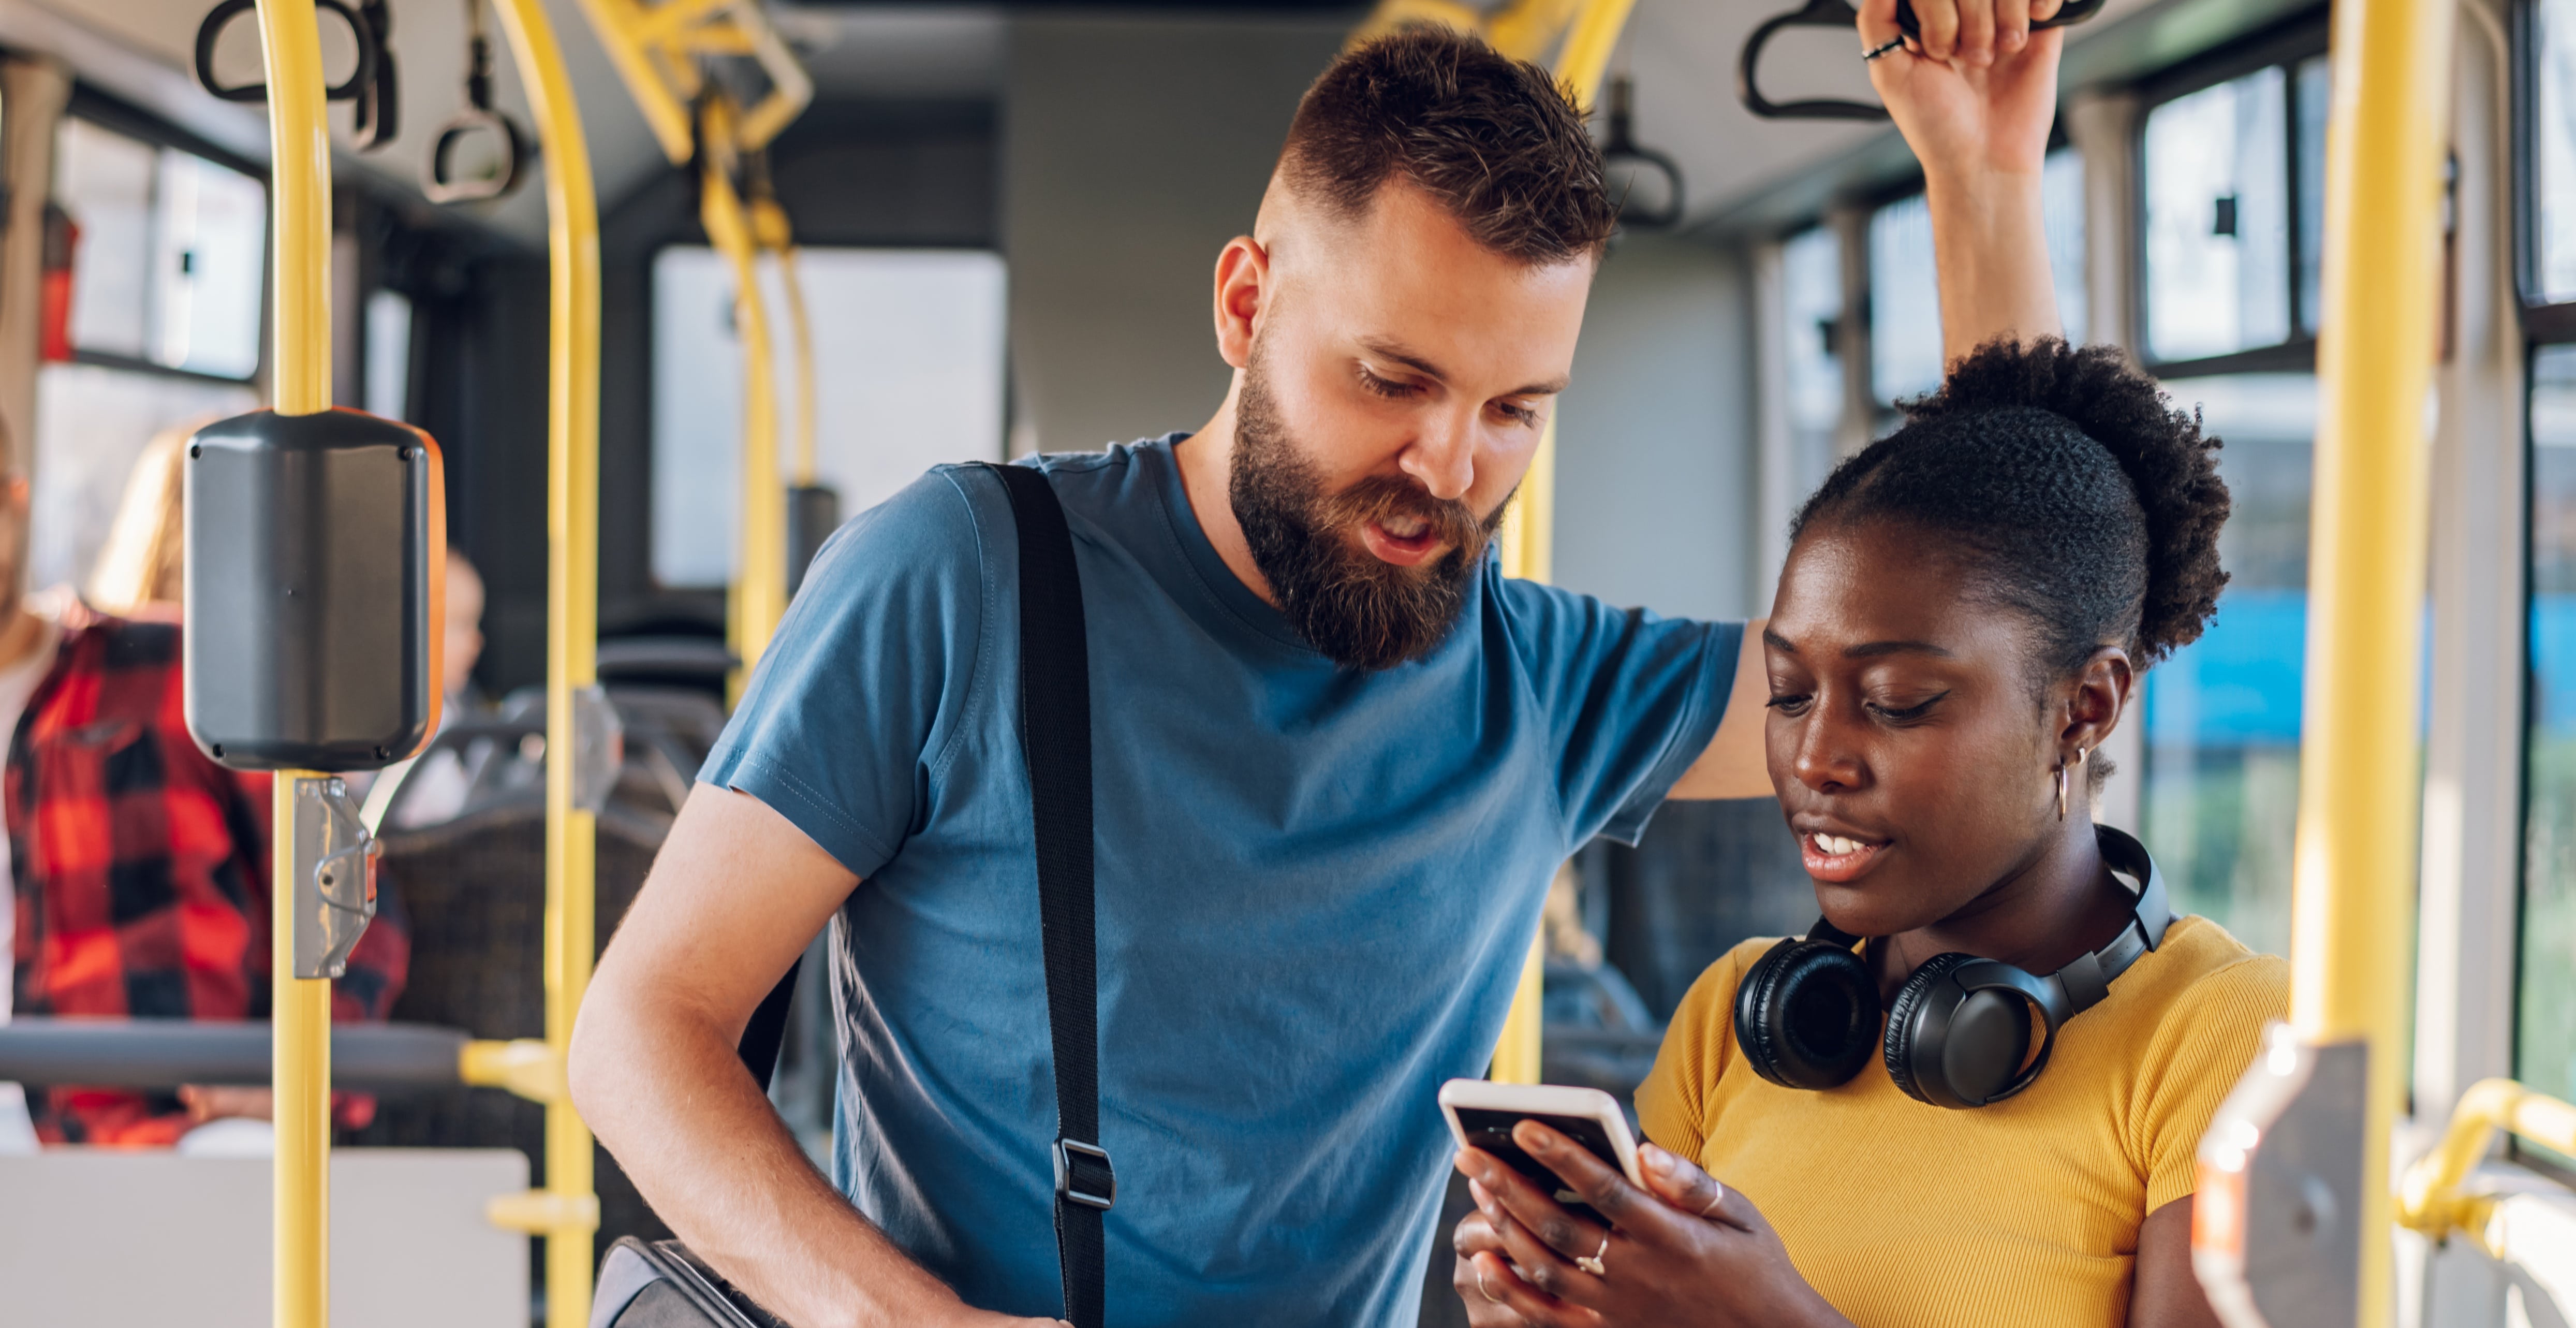 A young dark-skinned woman and a taller light-skinned man both look at a smartphone while riding a bus.  